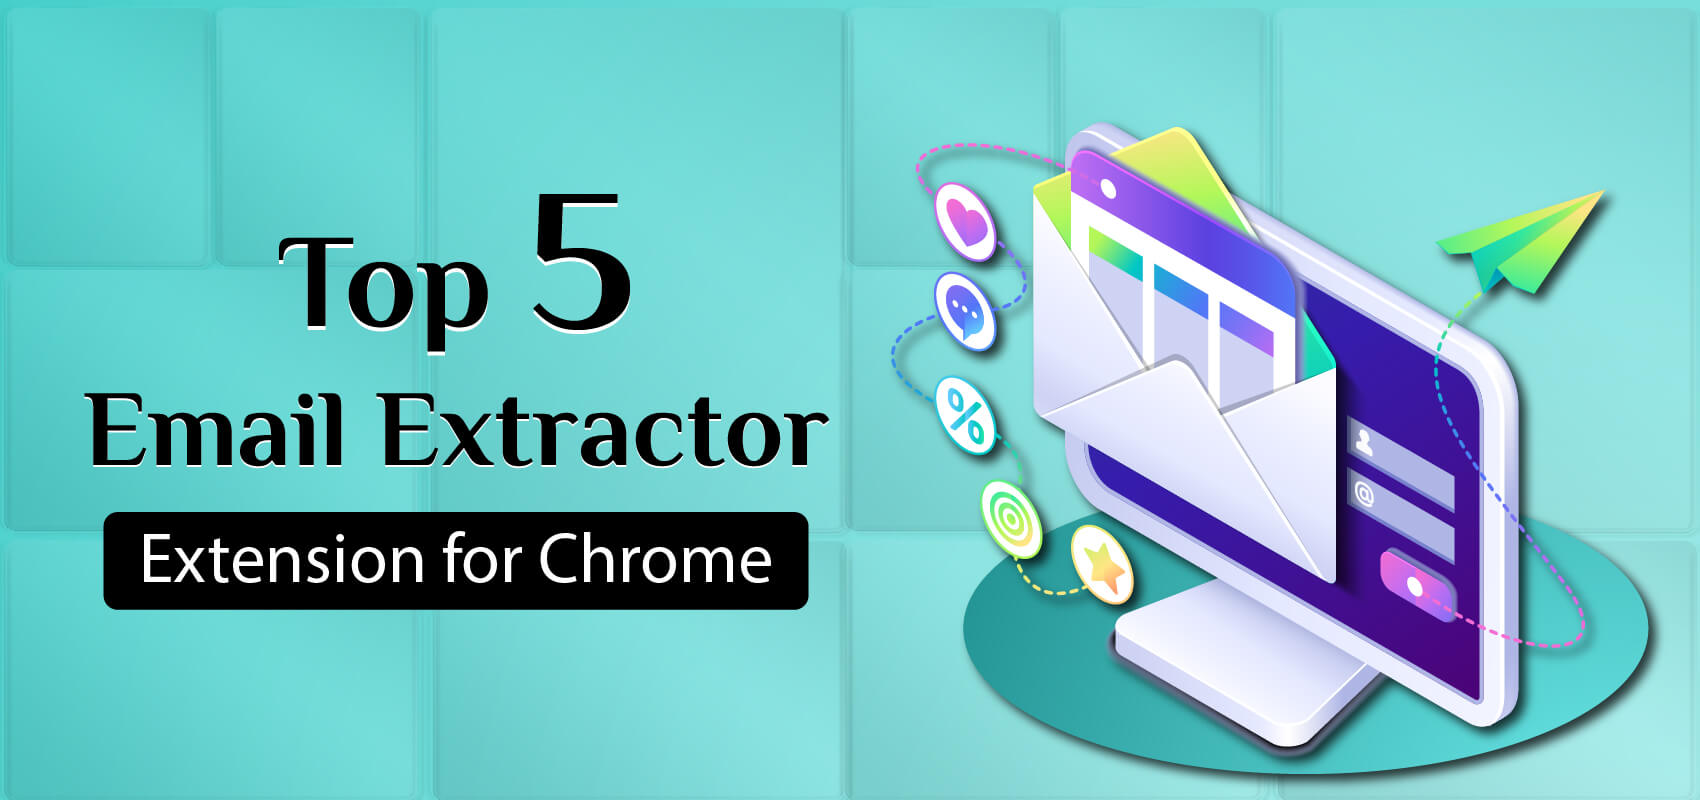 Top 5 Email Extractor Extension for Chrome